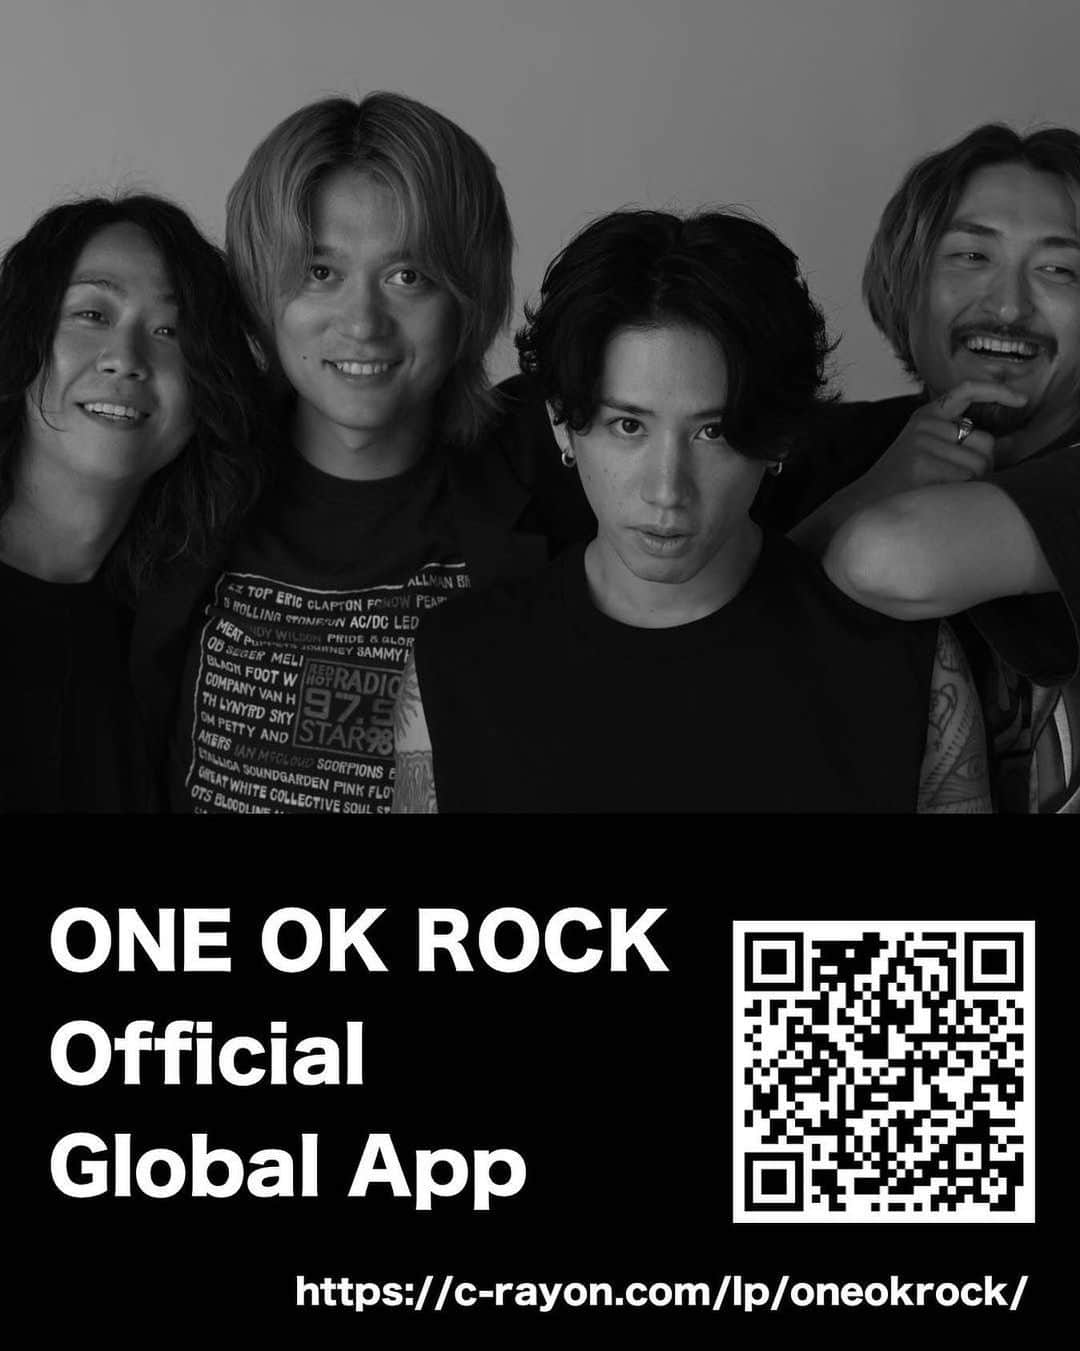 Taka のインスタグラム：「ONE OK ROCK has launched it’s global mobile app! This app allows you to find all the latest news of the band so get it now! https://c-rayon.com/lp/oneokrock/ #ONEOKROCK」